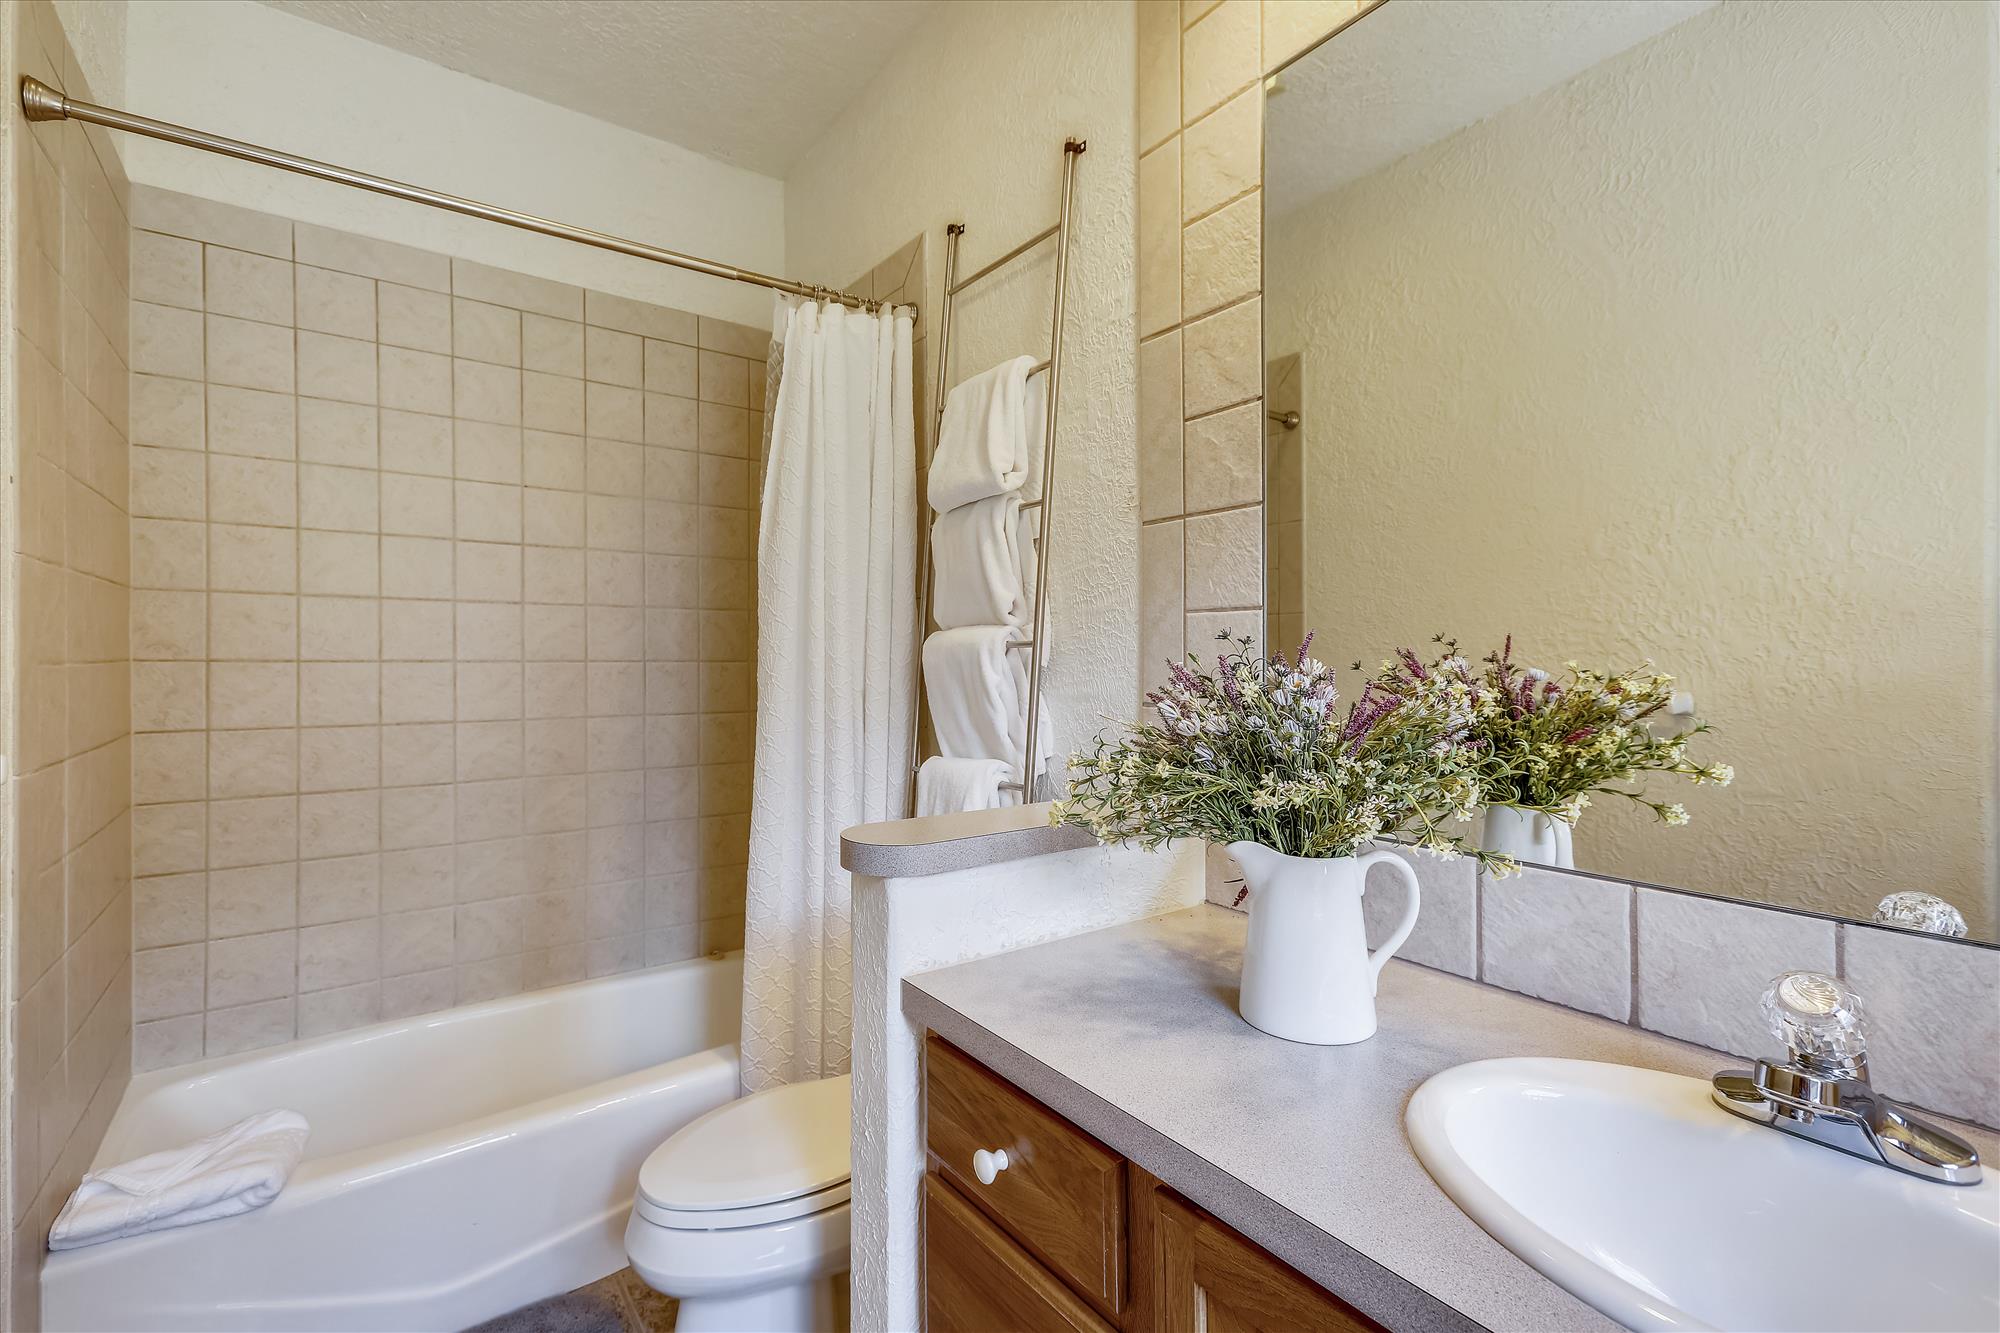 This private bathroom offers a dual tub and shower with lots of natural light - Evergreen Lodge Breckenridge Vacation Rental